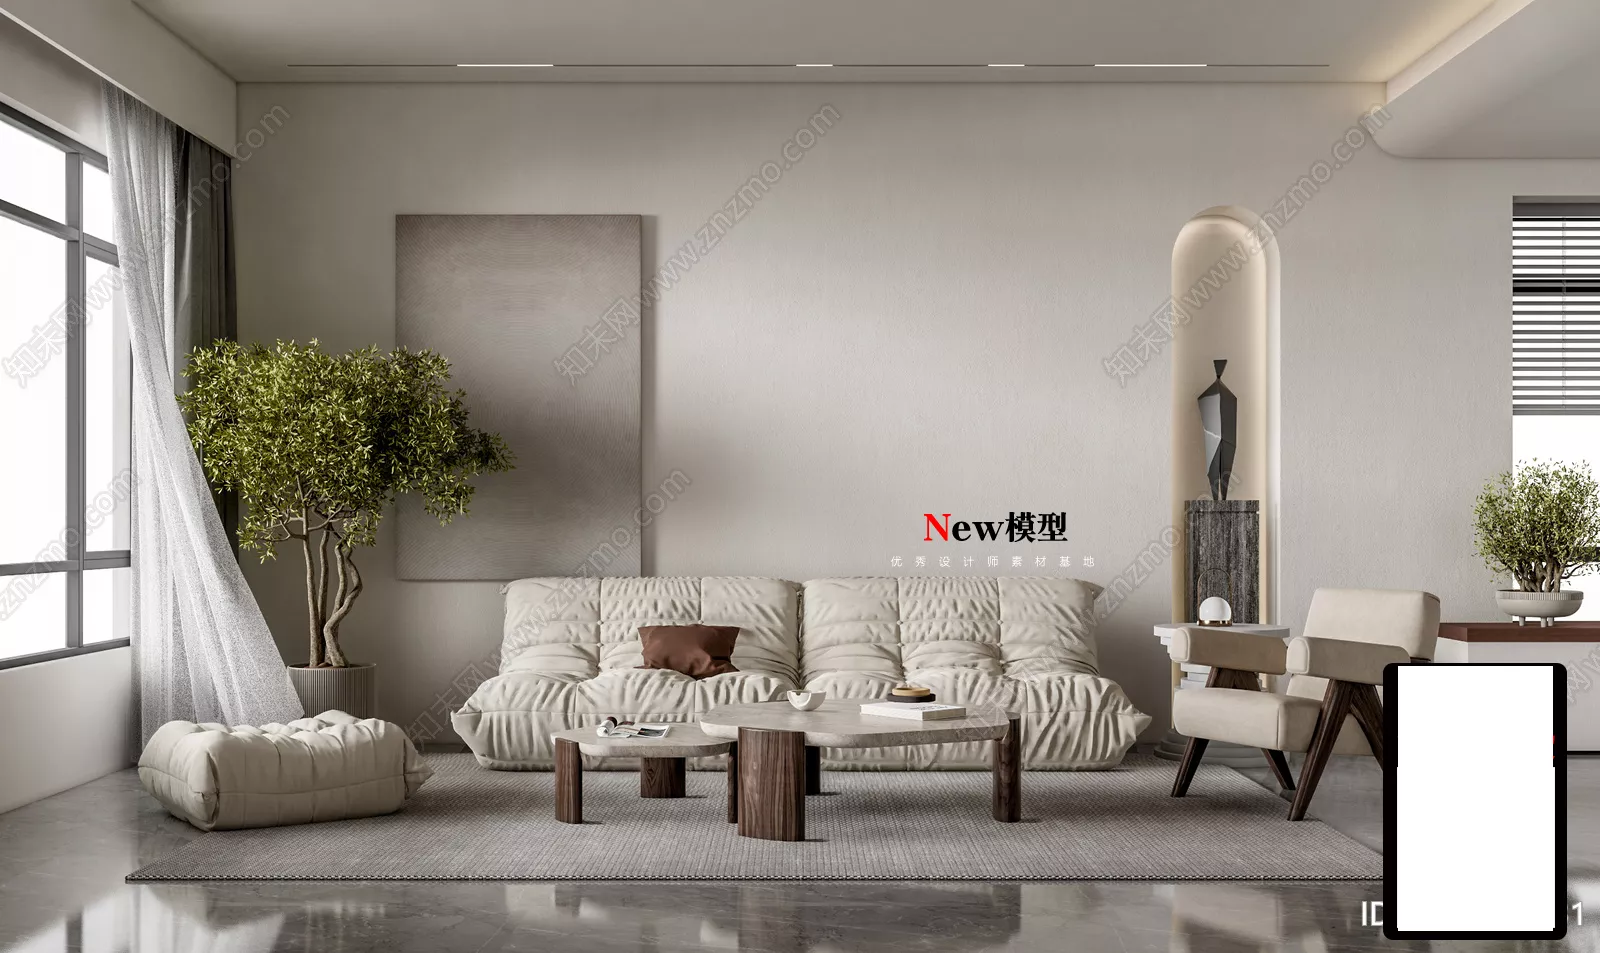 WABI SABI INTERIOR COLLECTION - SKETCHUP 3D SCENE - VRAY OR ENSCAPE - ID17927